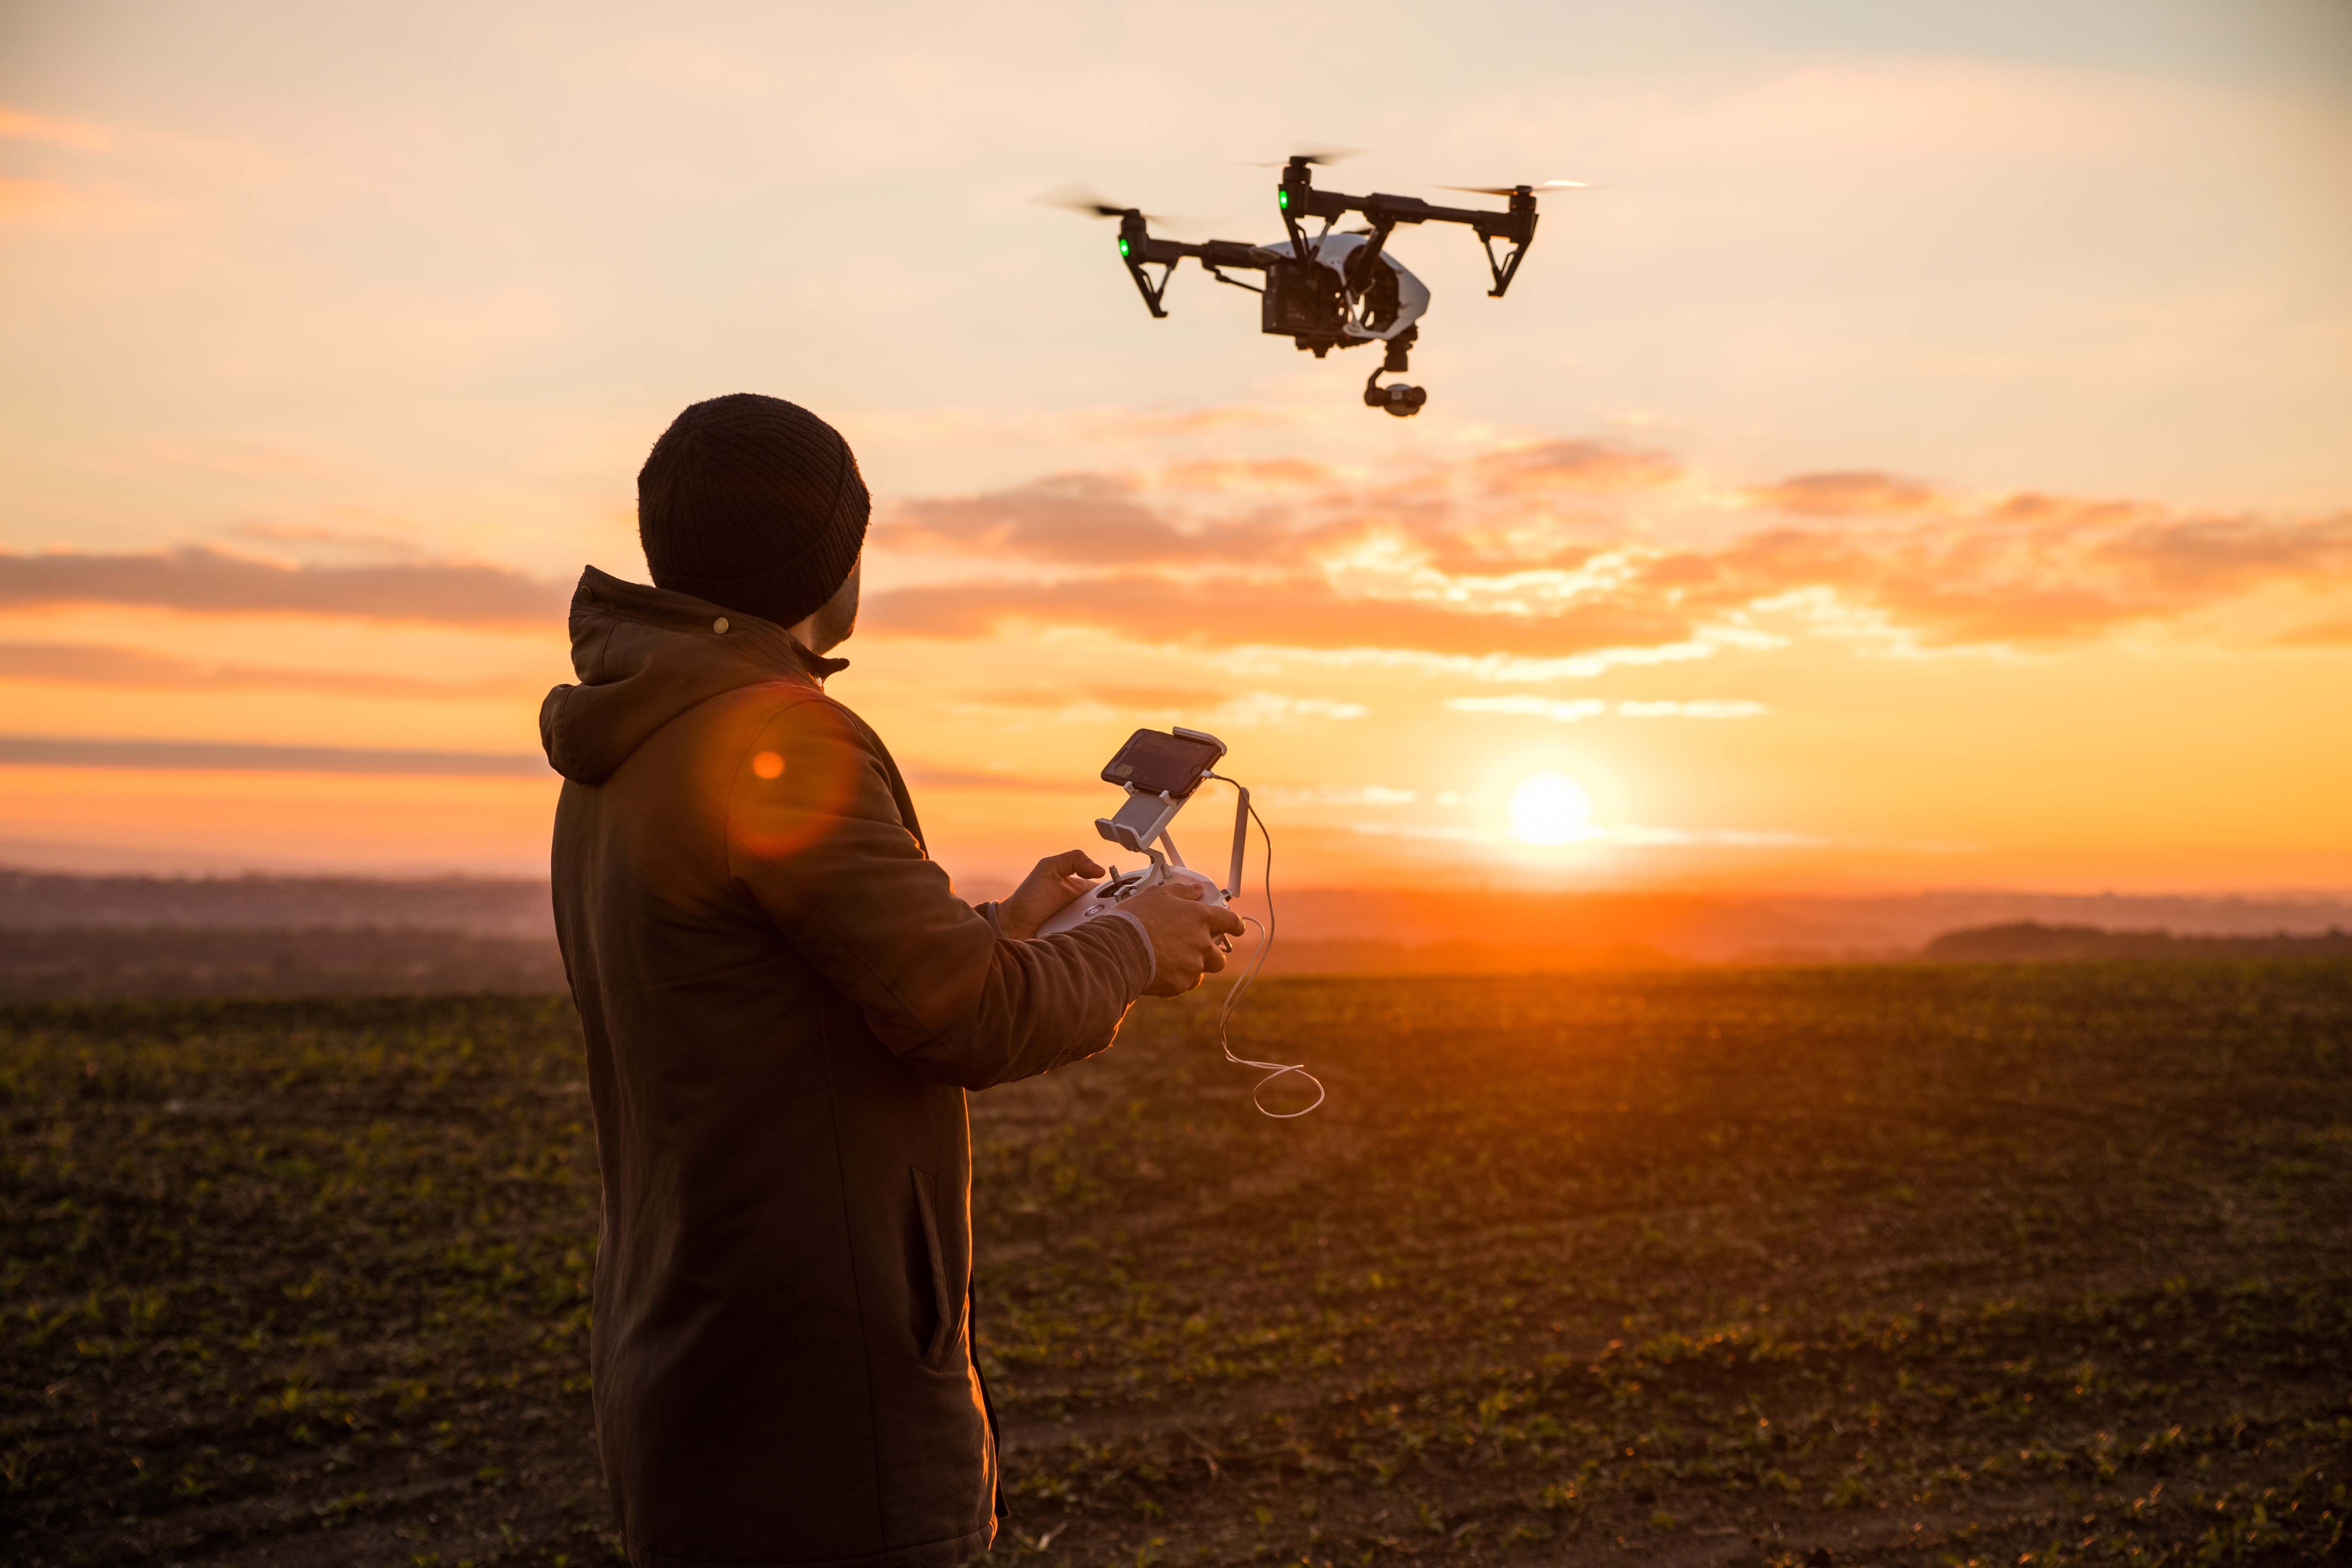 A person flies a drone in a field